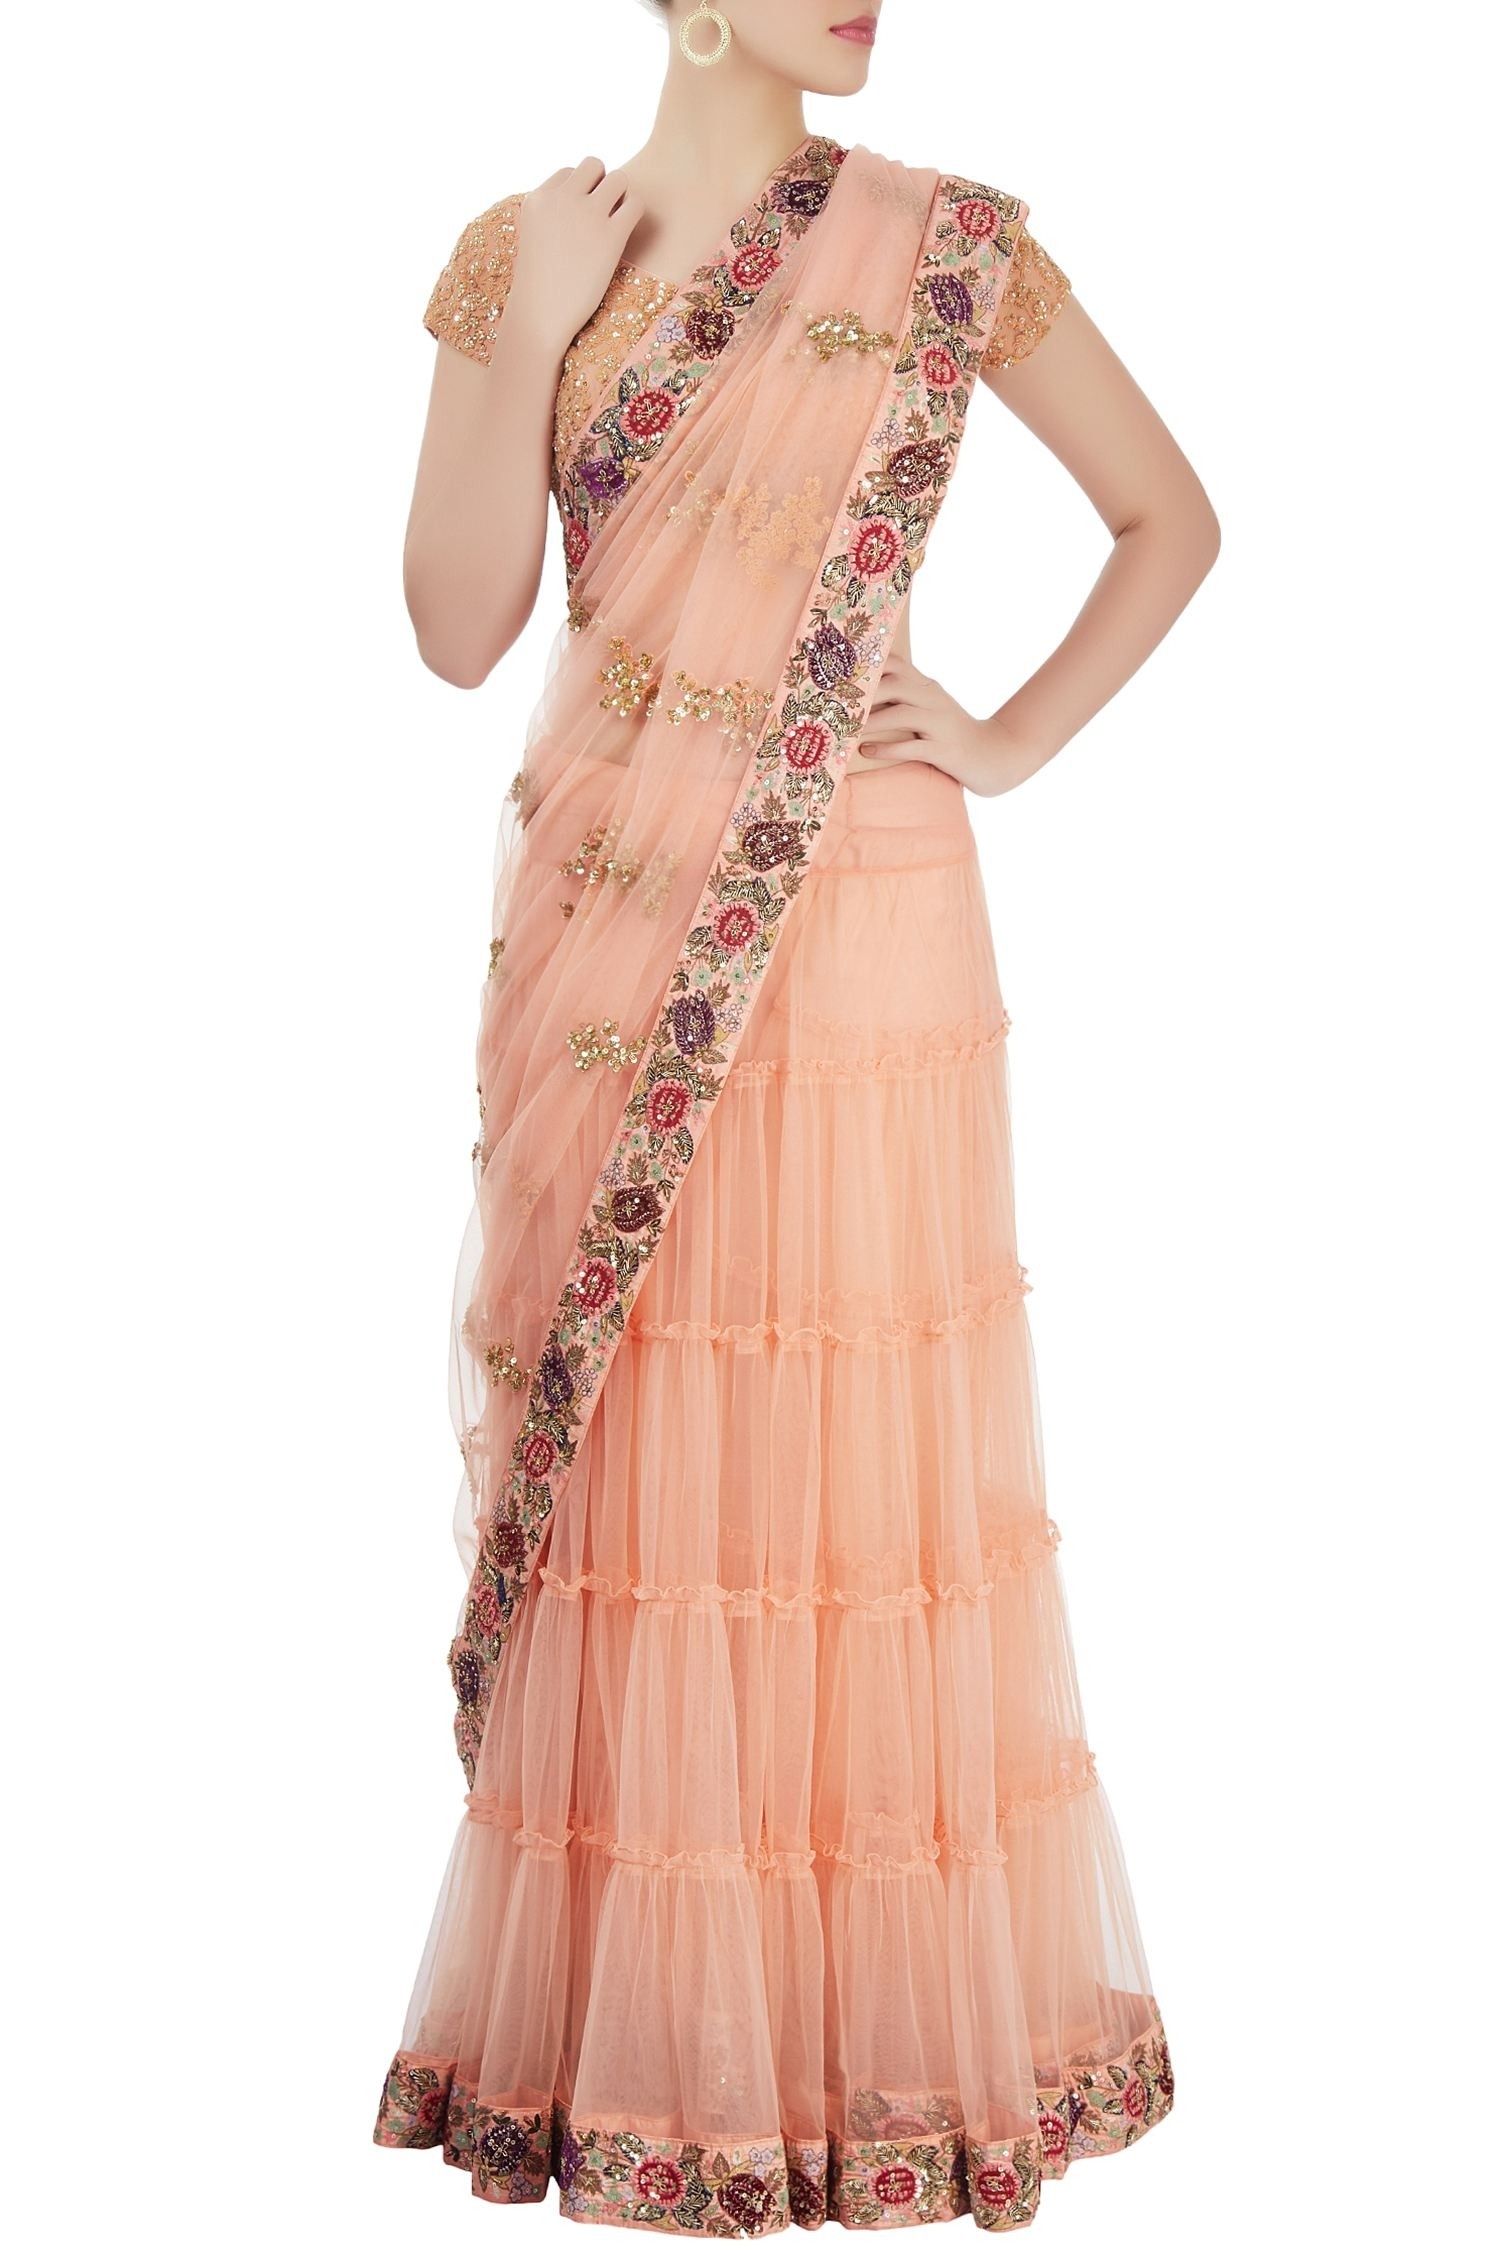 fancy sarees for weddings